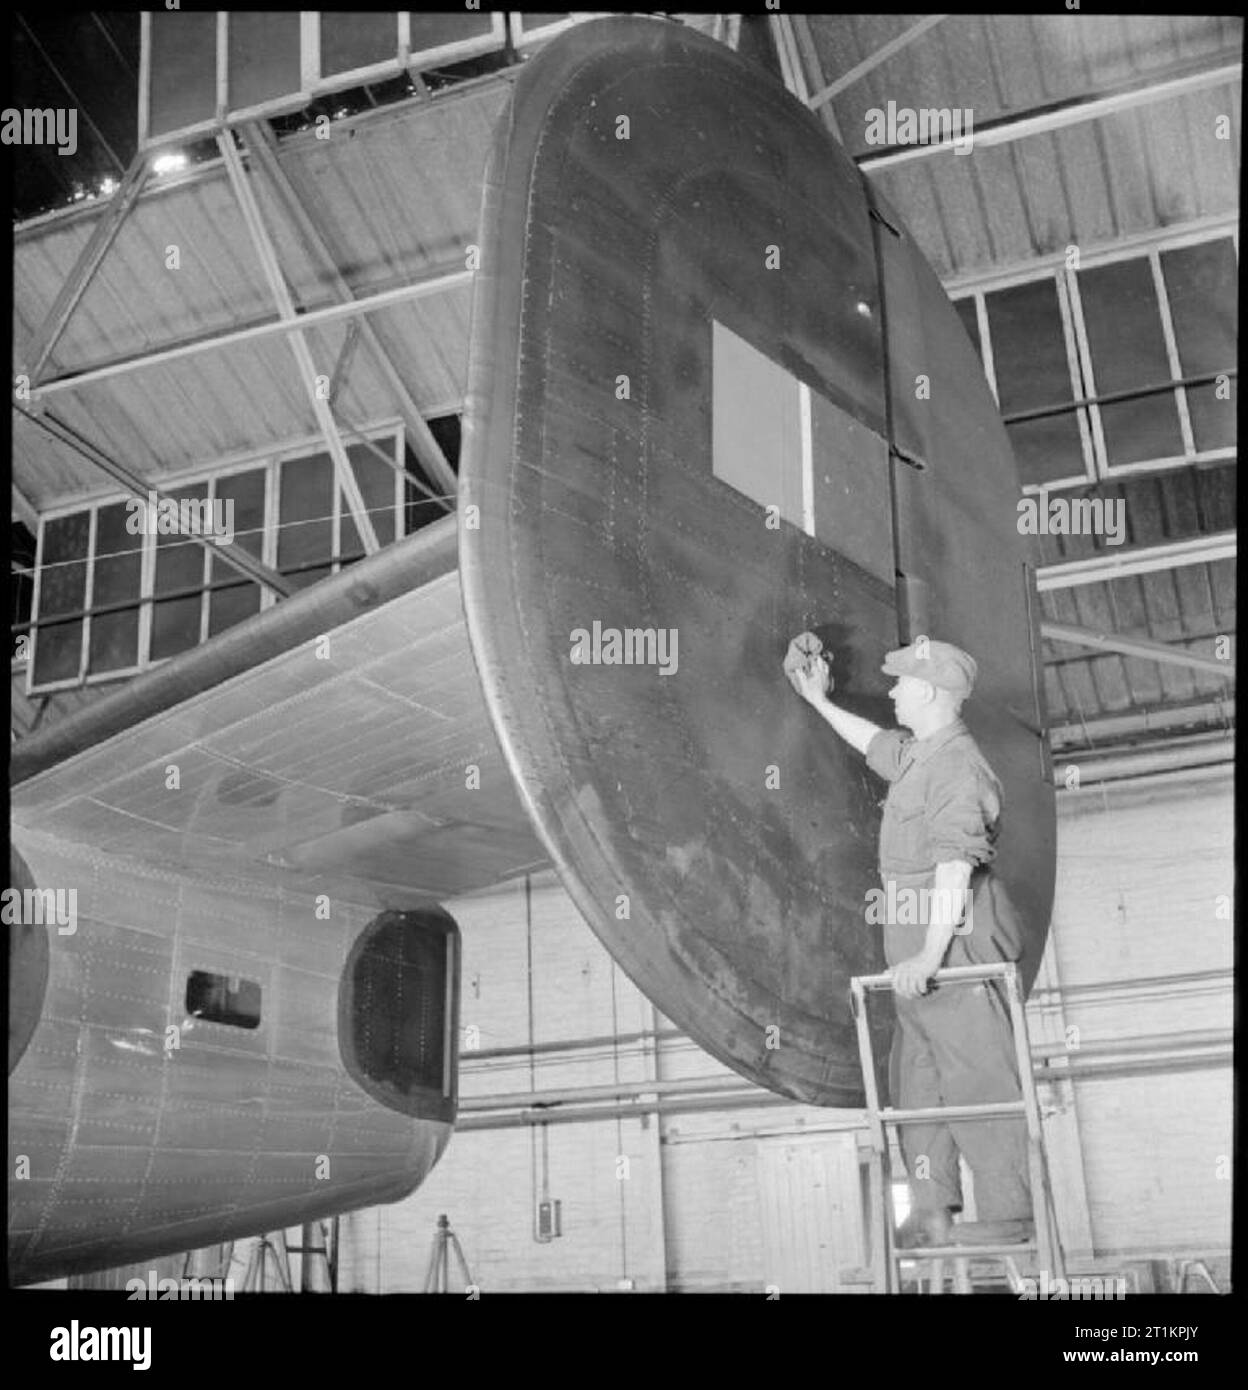 Prestwick Airport- Transport and Travel in Wartime, Prestwick, Ayrshire, Scotland, UK, 1944 A member of the ground crew at Prestwick airport cleans the tail fin of a Consolidated B-24 Liberator aircraft. Stock Photo